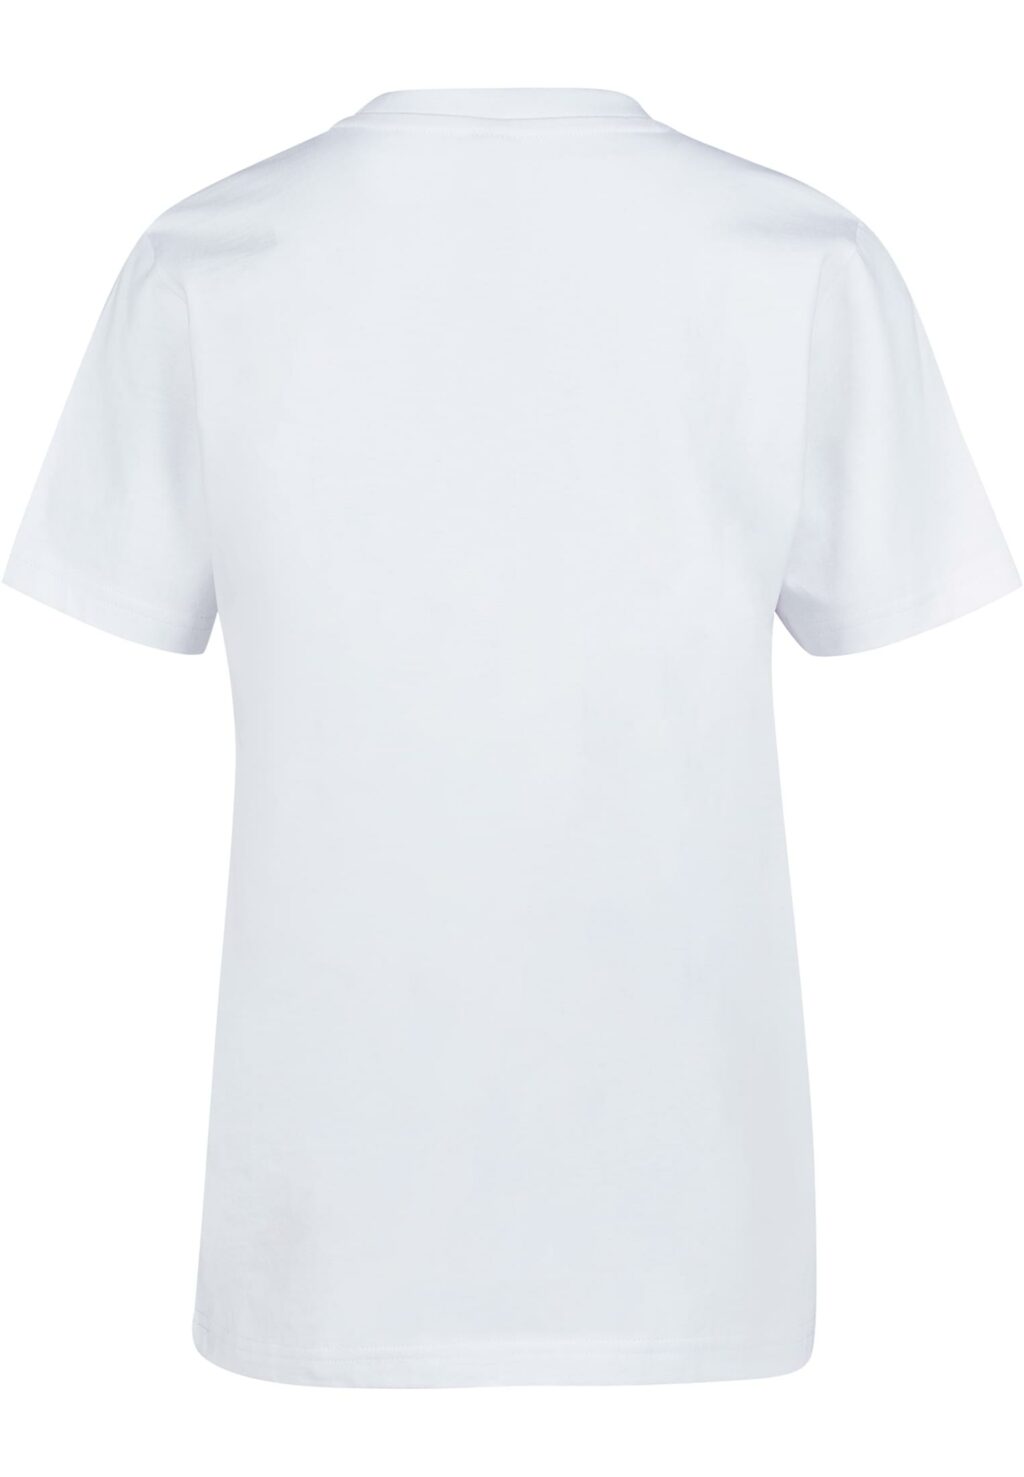 Kids Faster Than Your Average Tee white MTK257